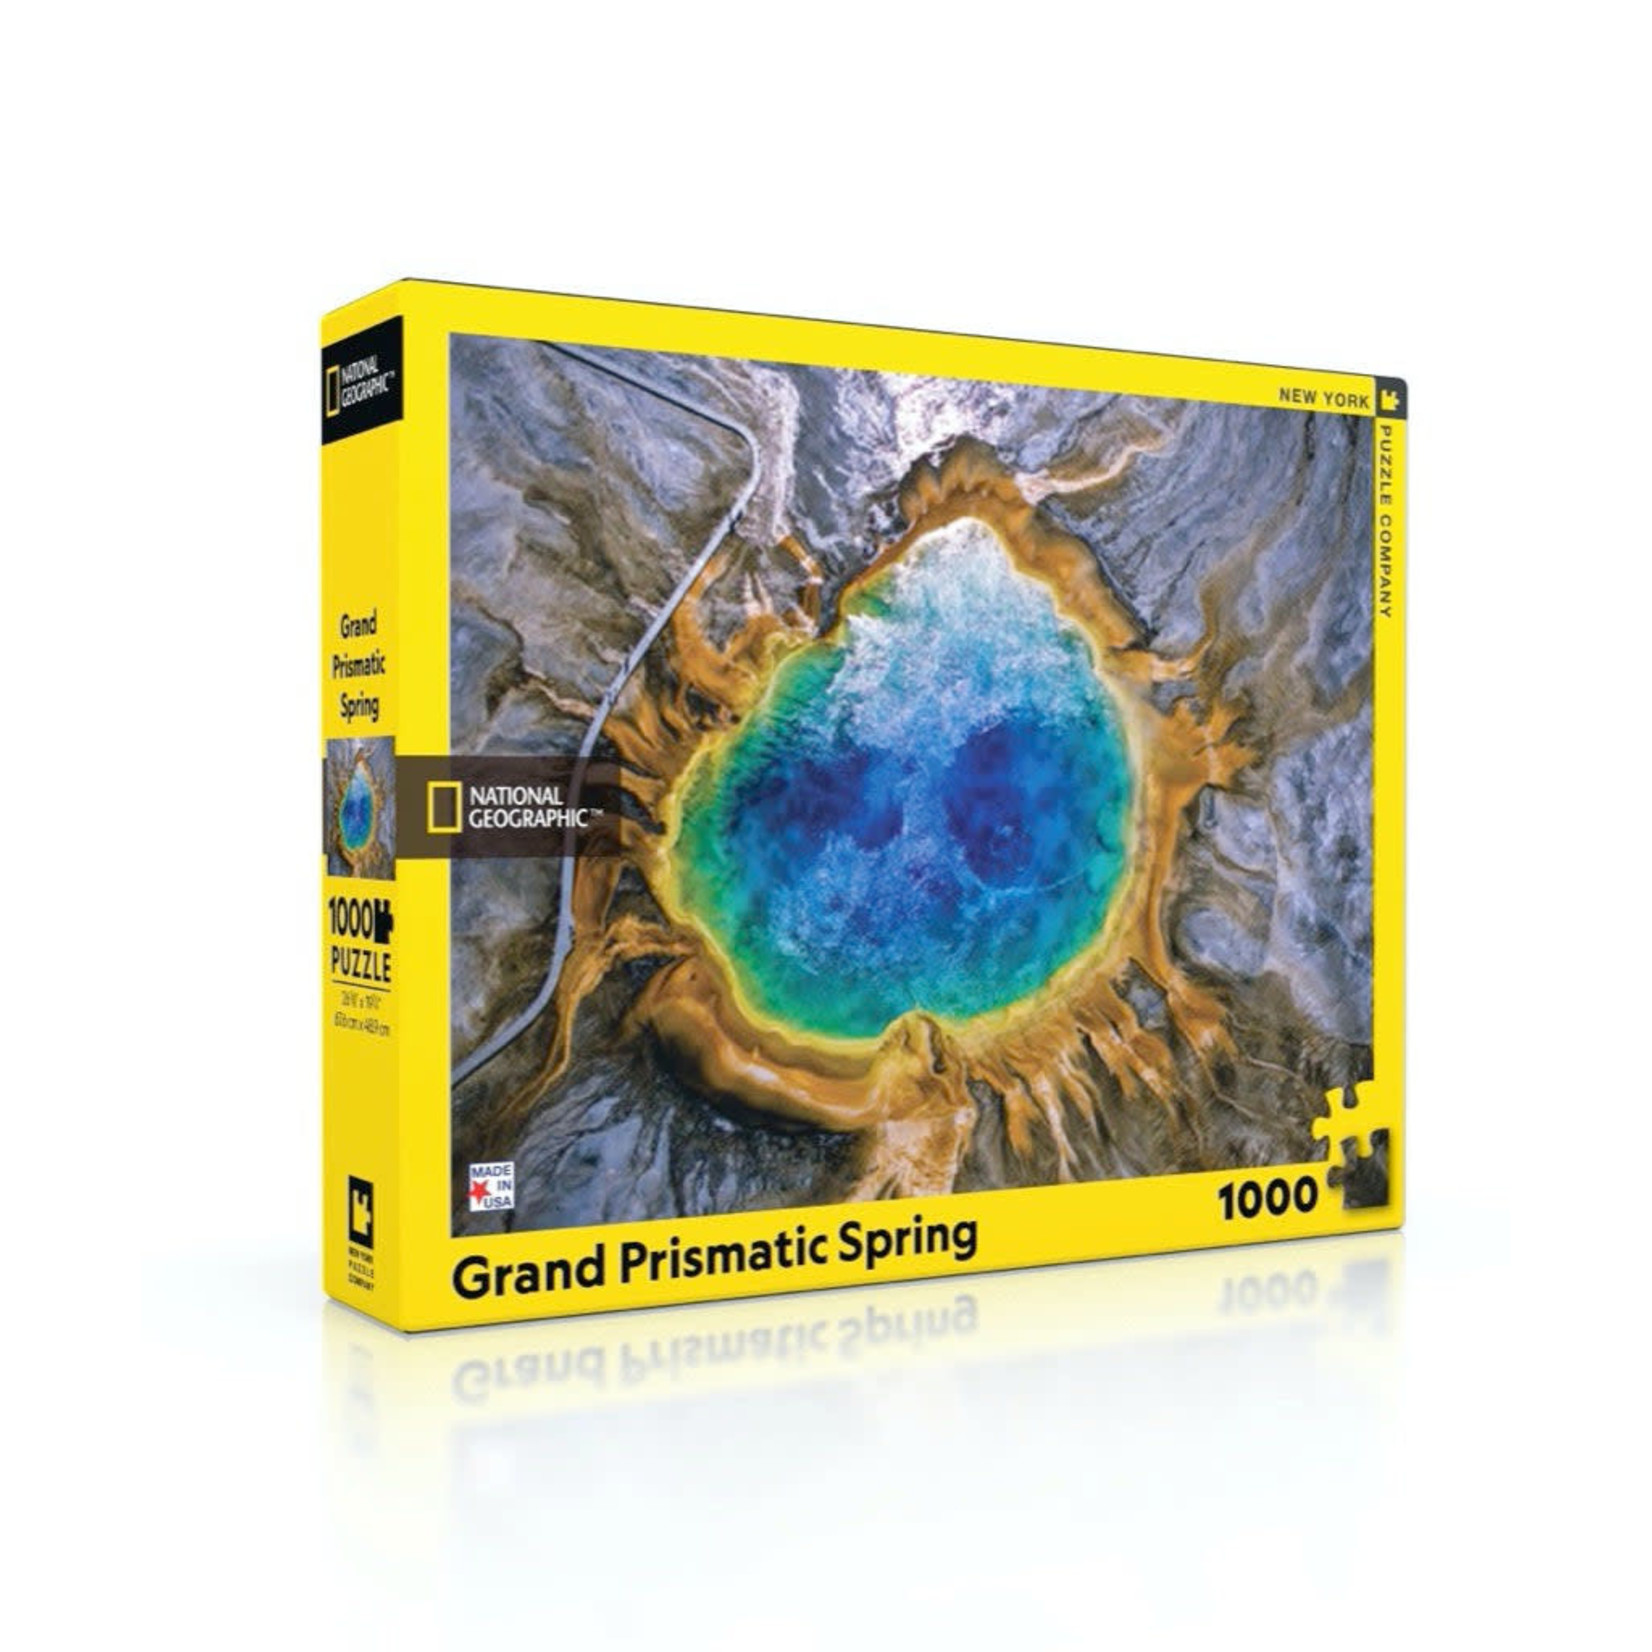 New York Puzzle Co National Geographic - Grand Prismatic Spring 1000 Piece Puzzle